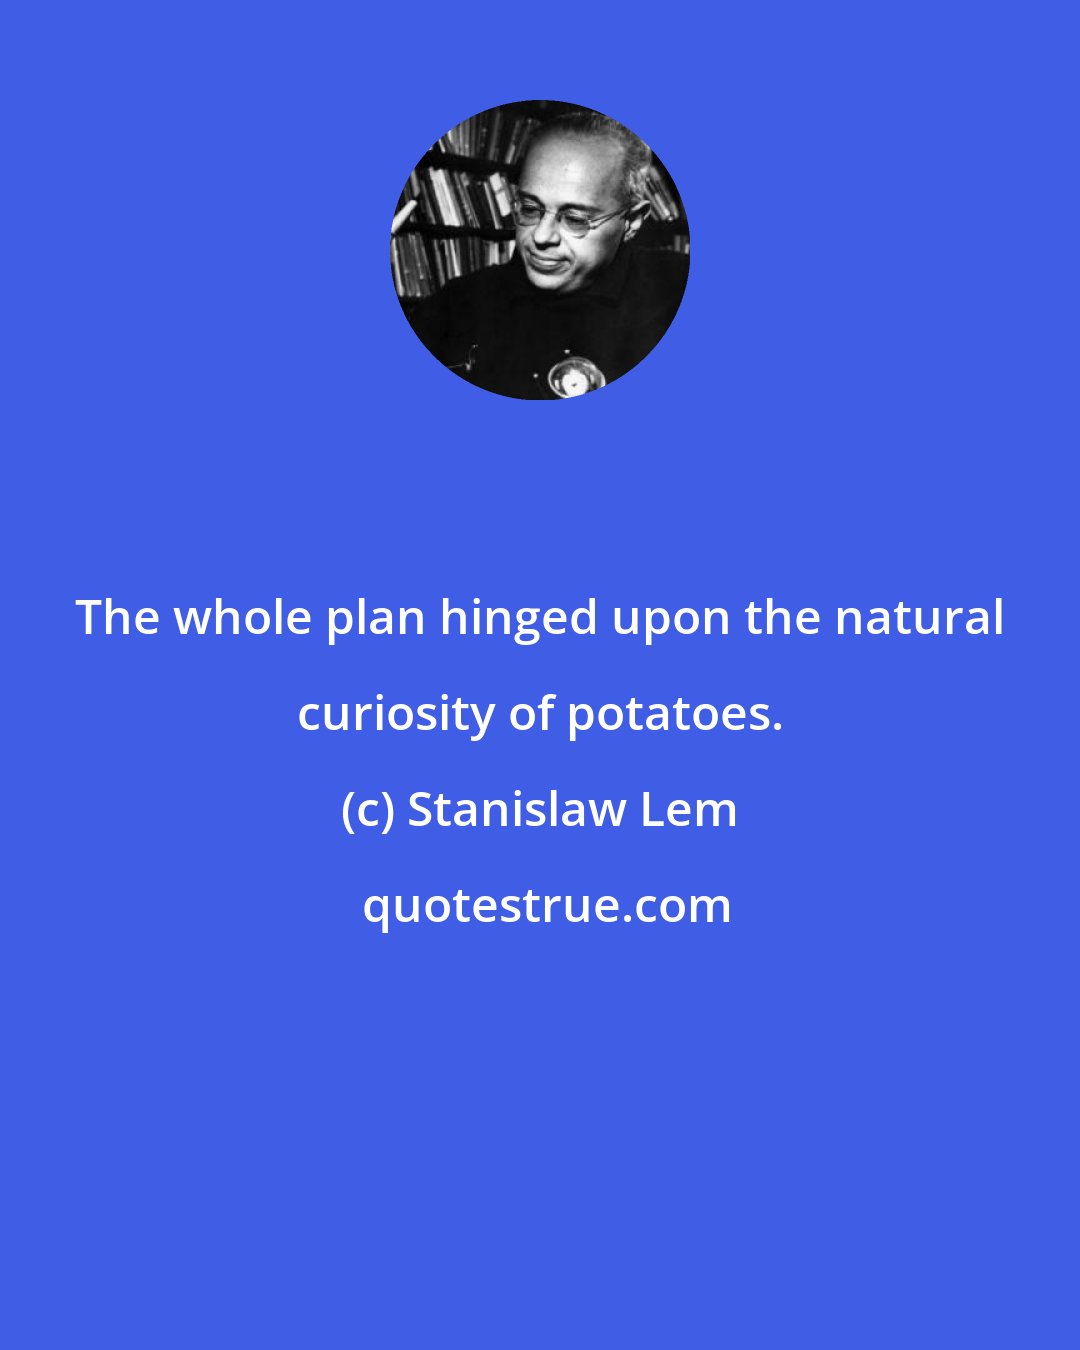 Stanislaw Lem: The whole plan hinged upon the natural curiosity of potatoes.